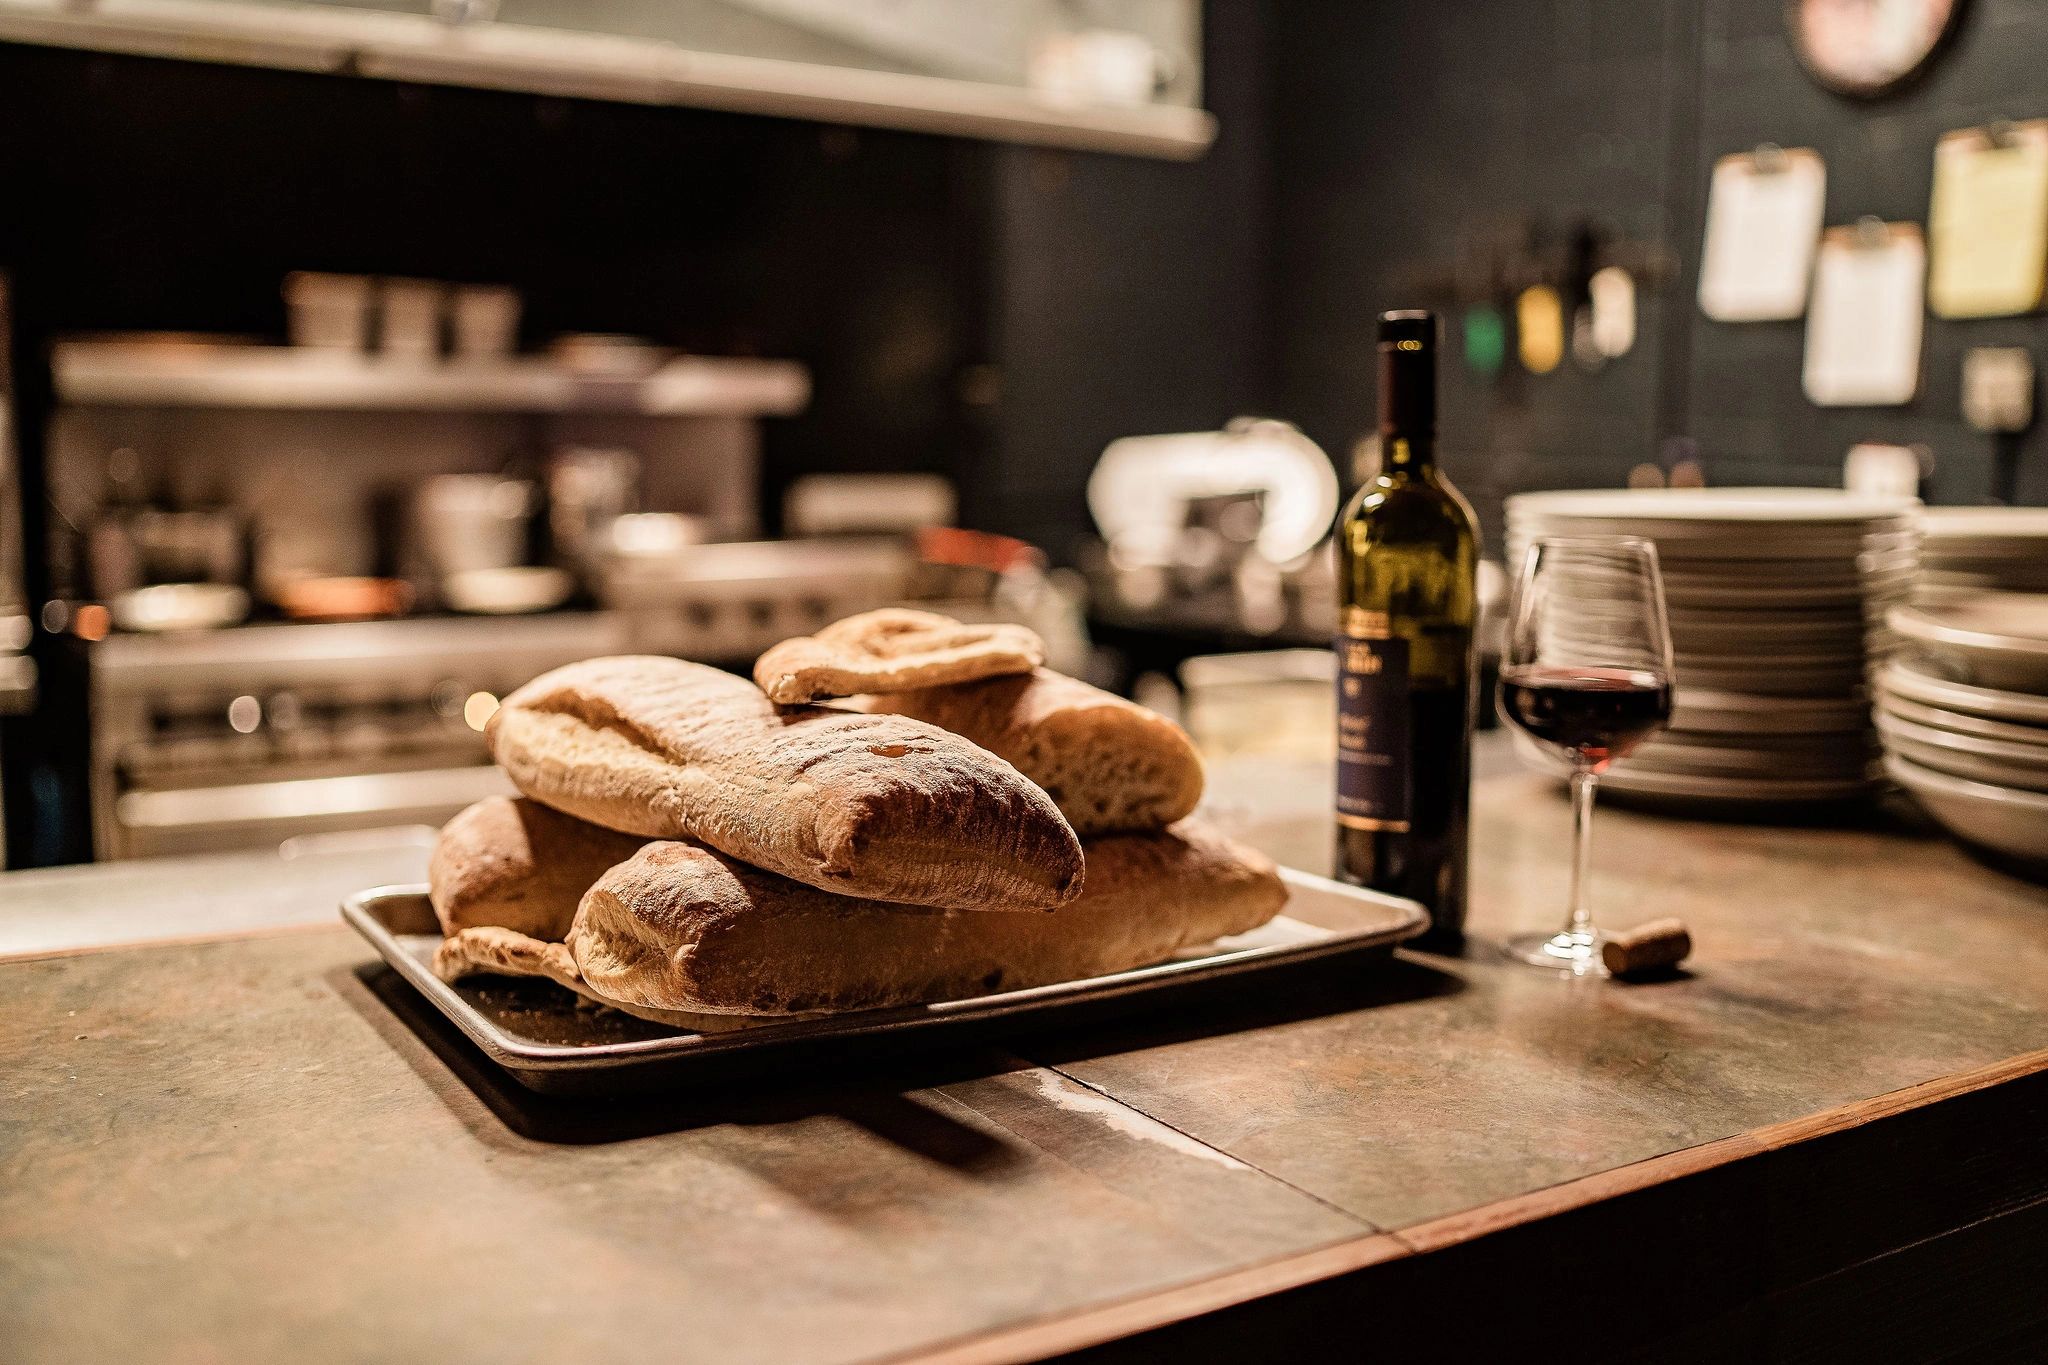 Fresh baked bread and glass of red wine